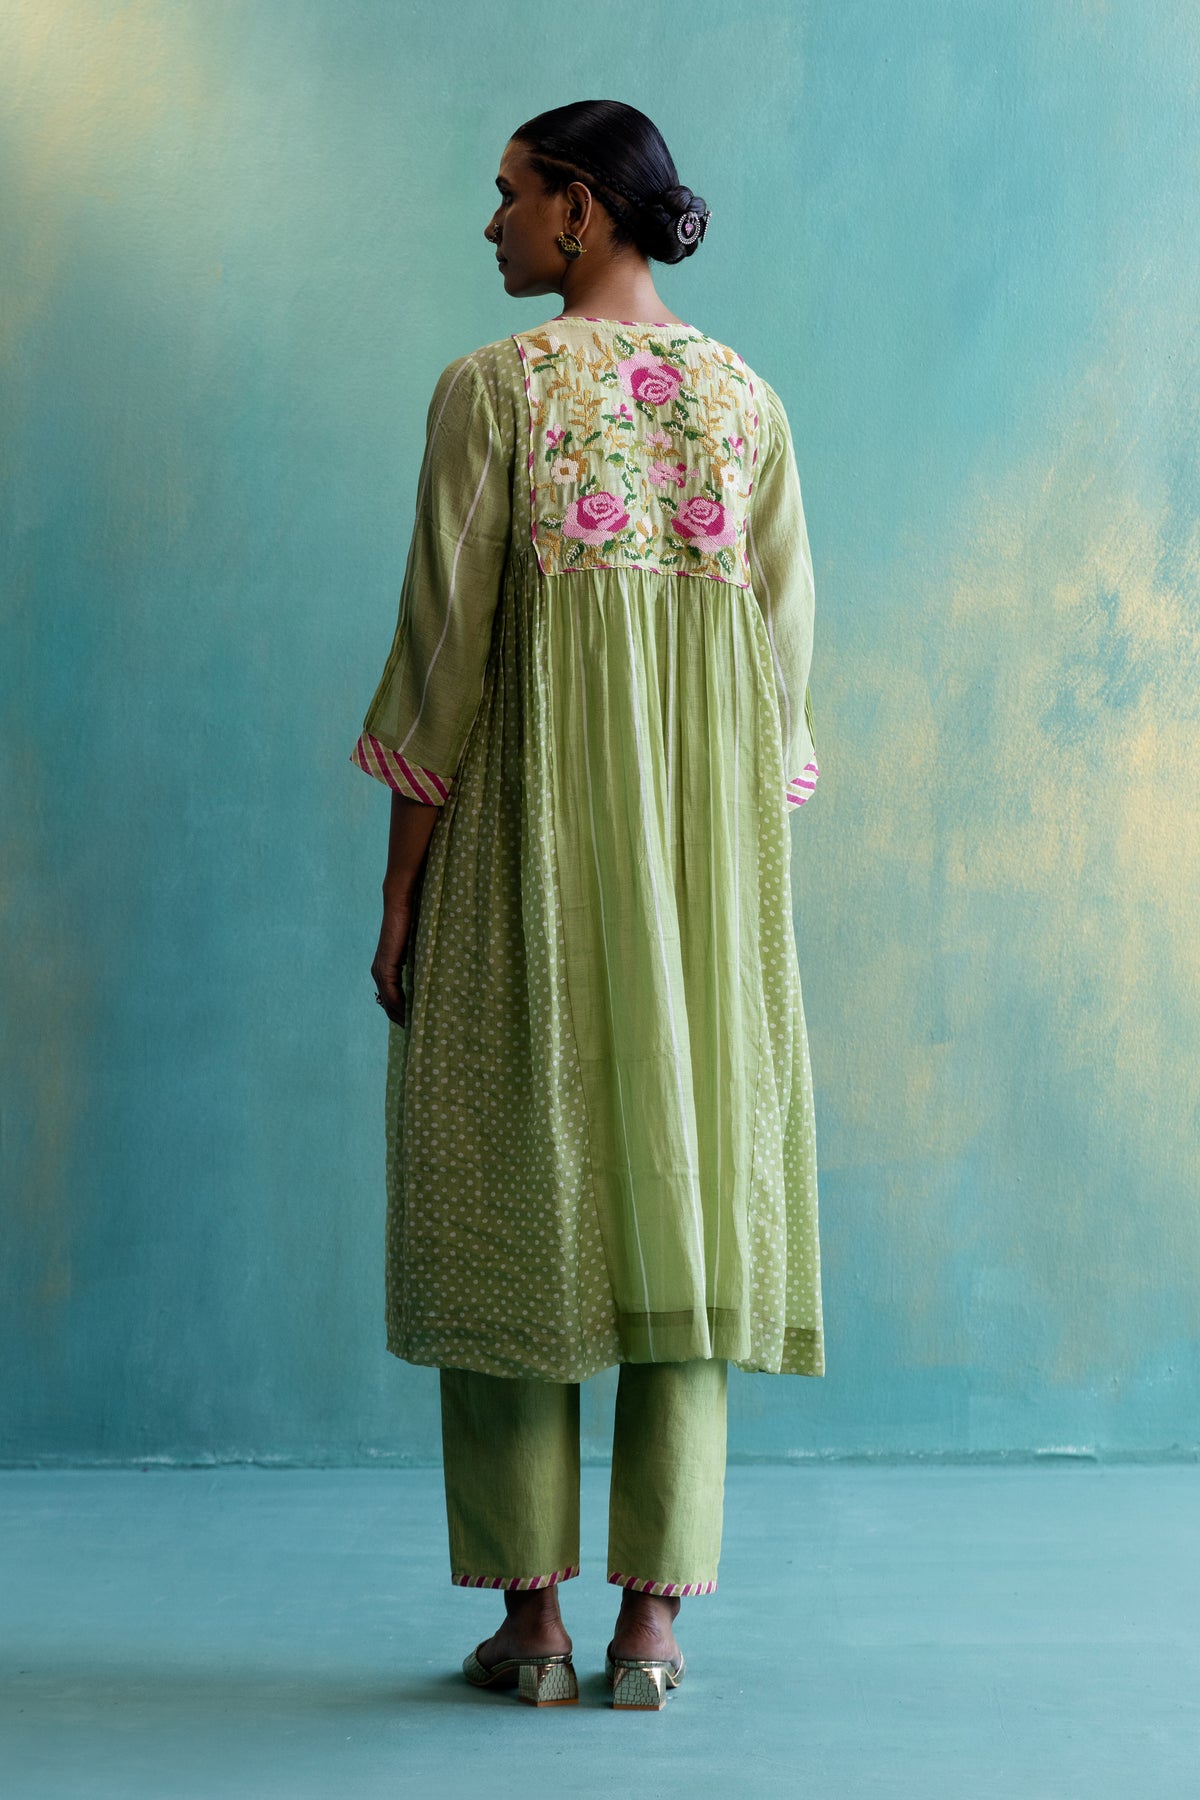 DIL-KASH OLIVE GREEN CHANDERI FRONT AND BACK FLORAL EMBROIDERY WITH SIDE PLEATS AND POLKAS KURTA SET OF 3